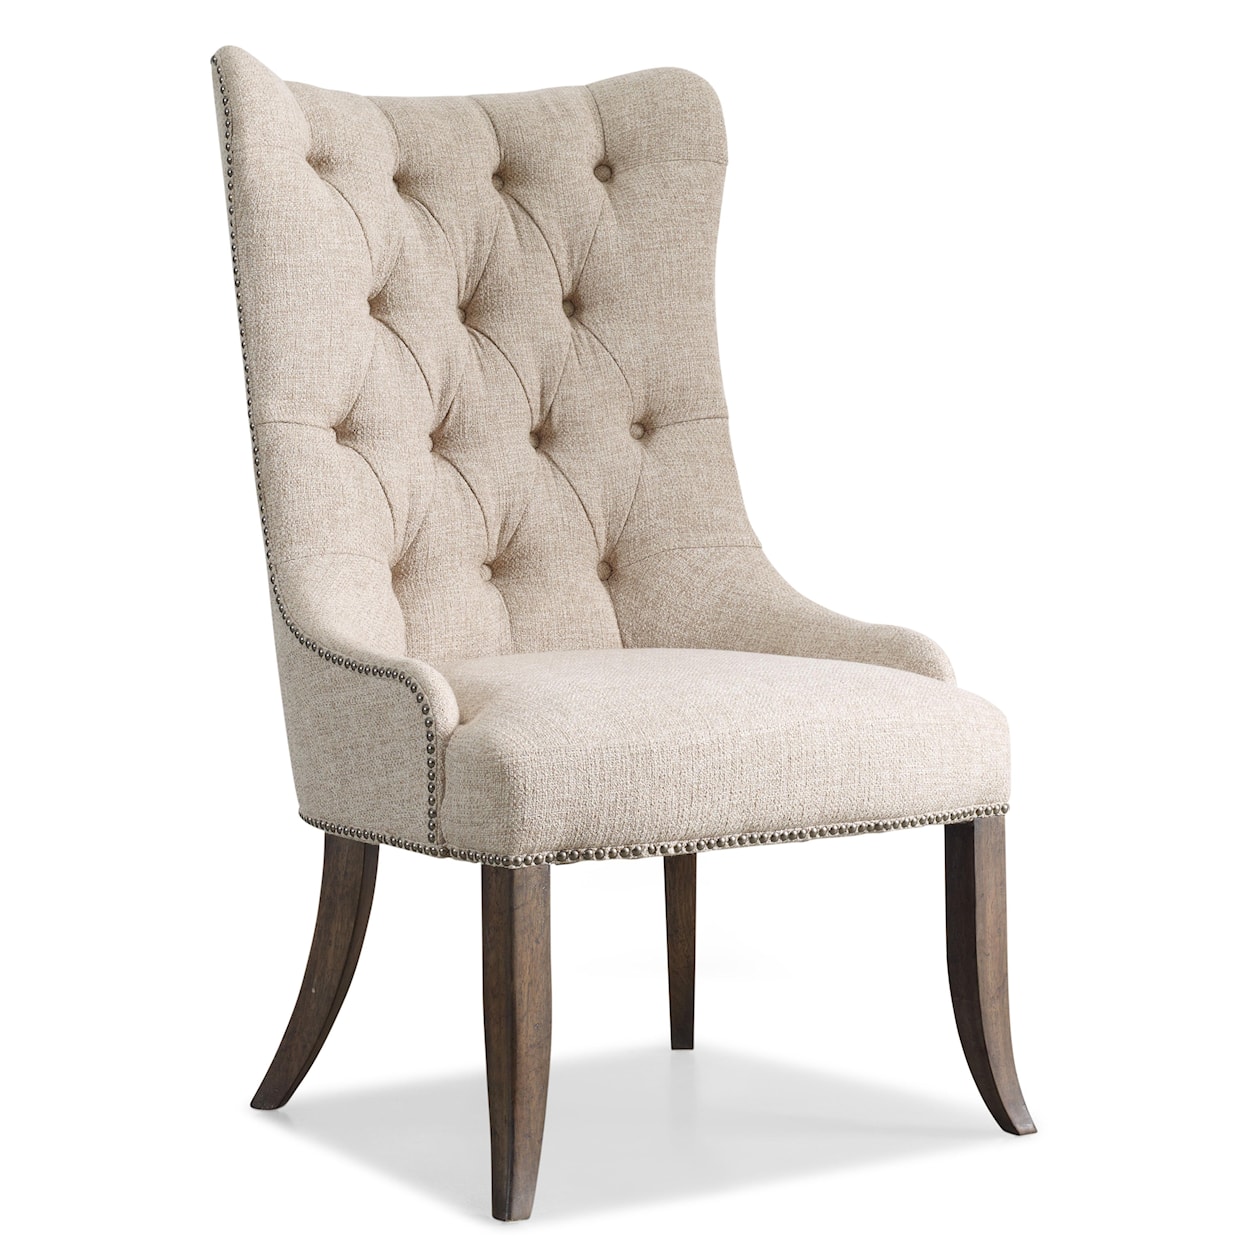 Hooker Furniture Rhapsody Tufted Dining Chair